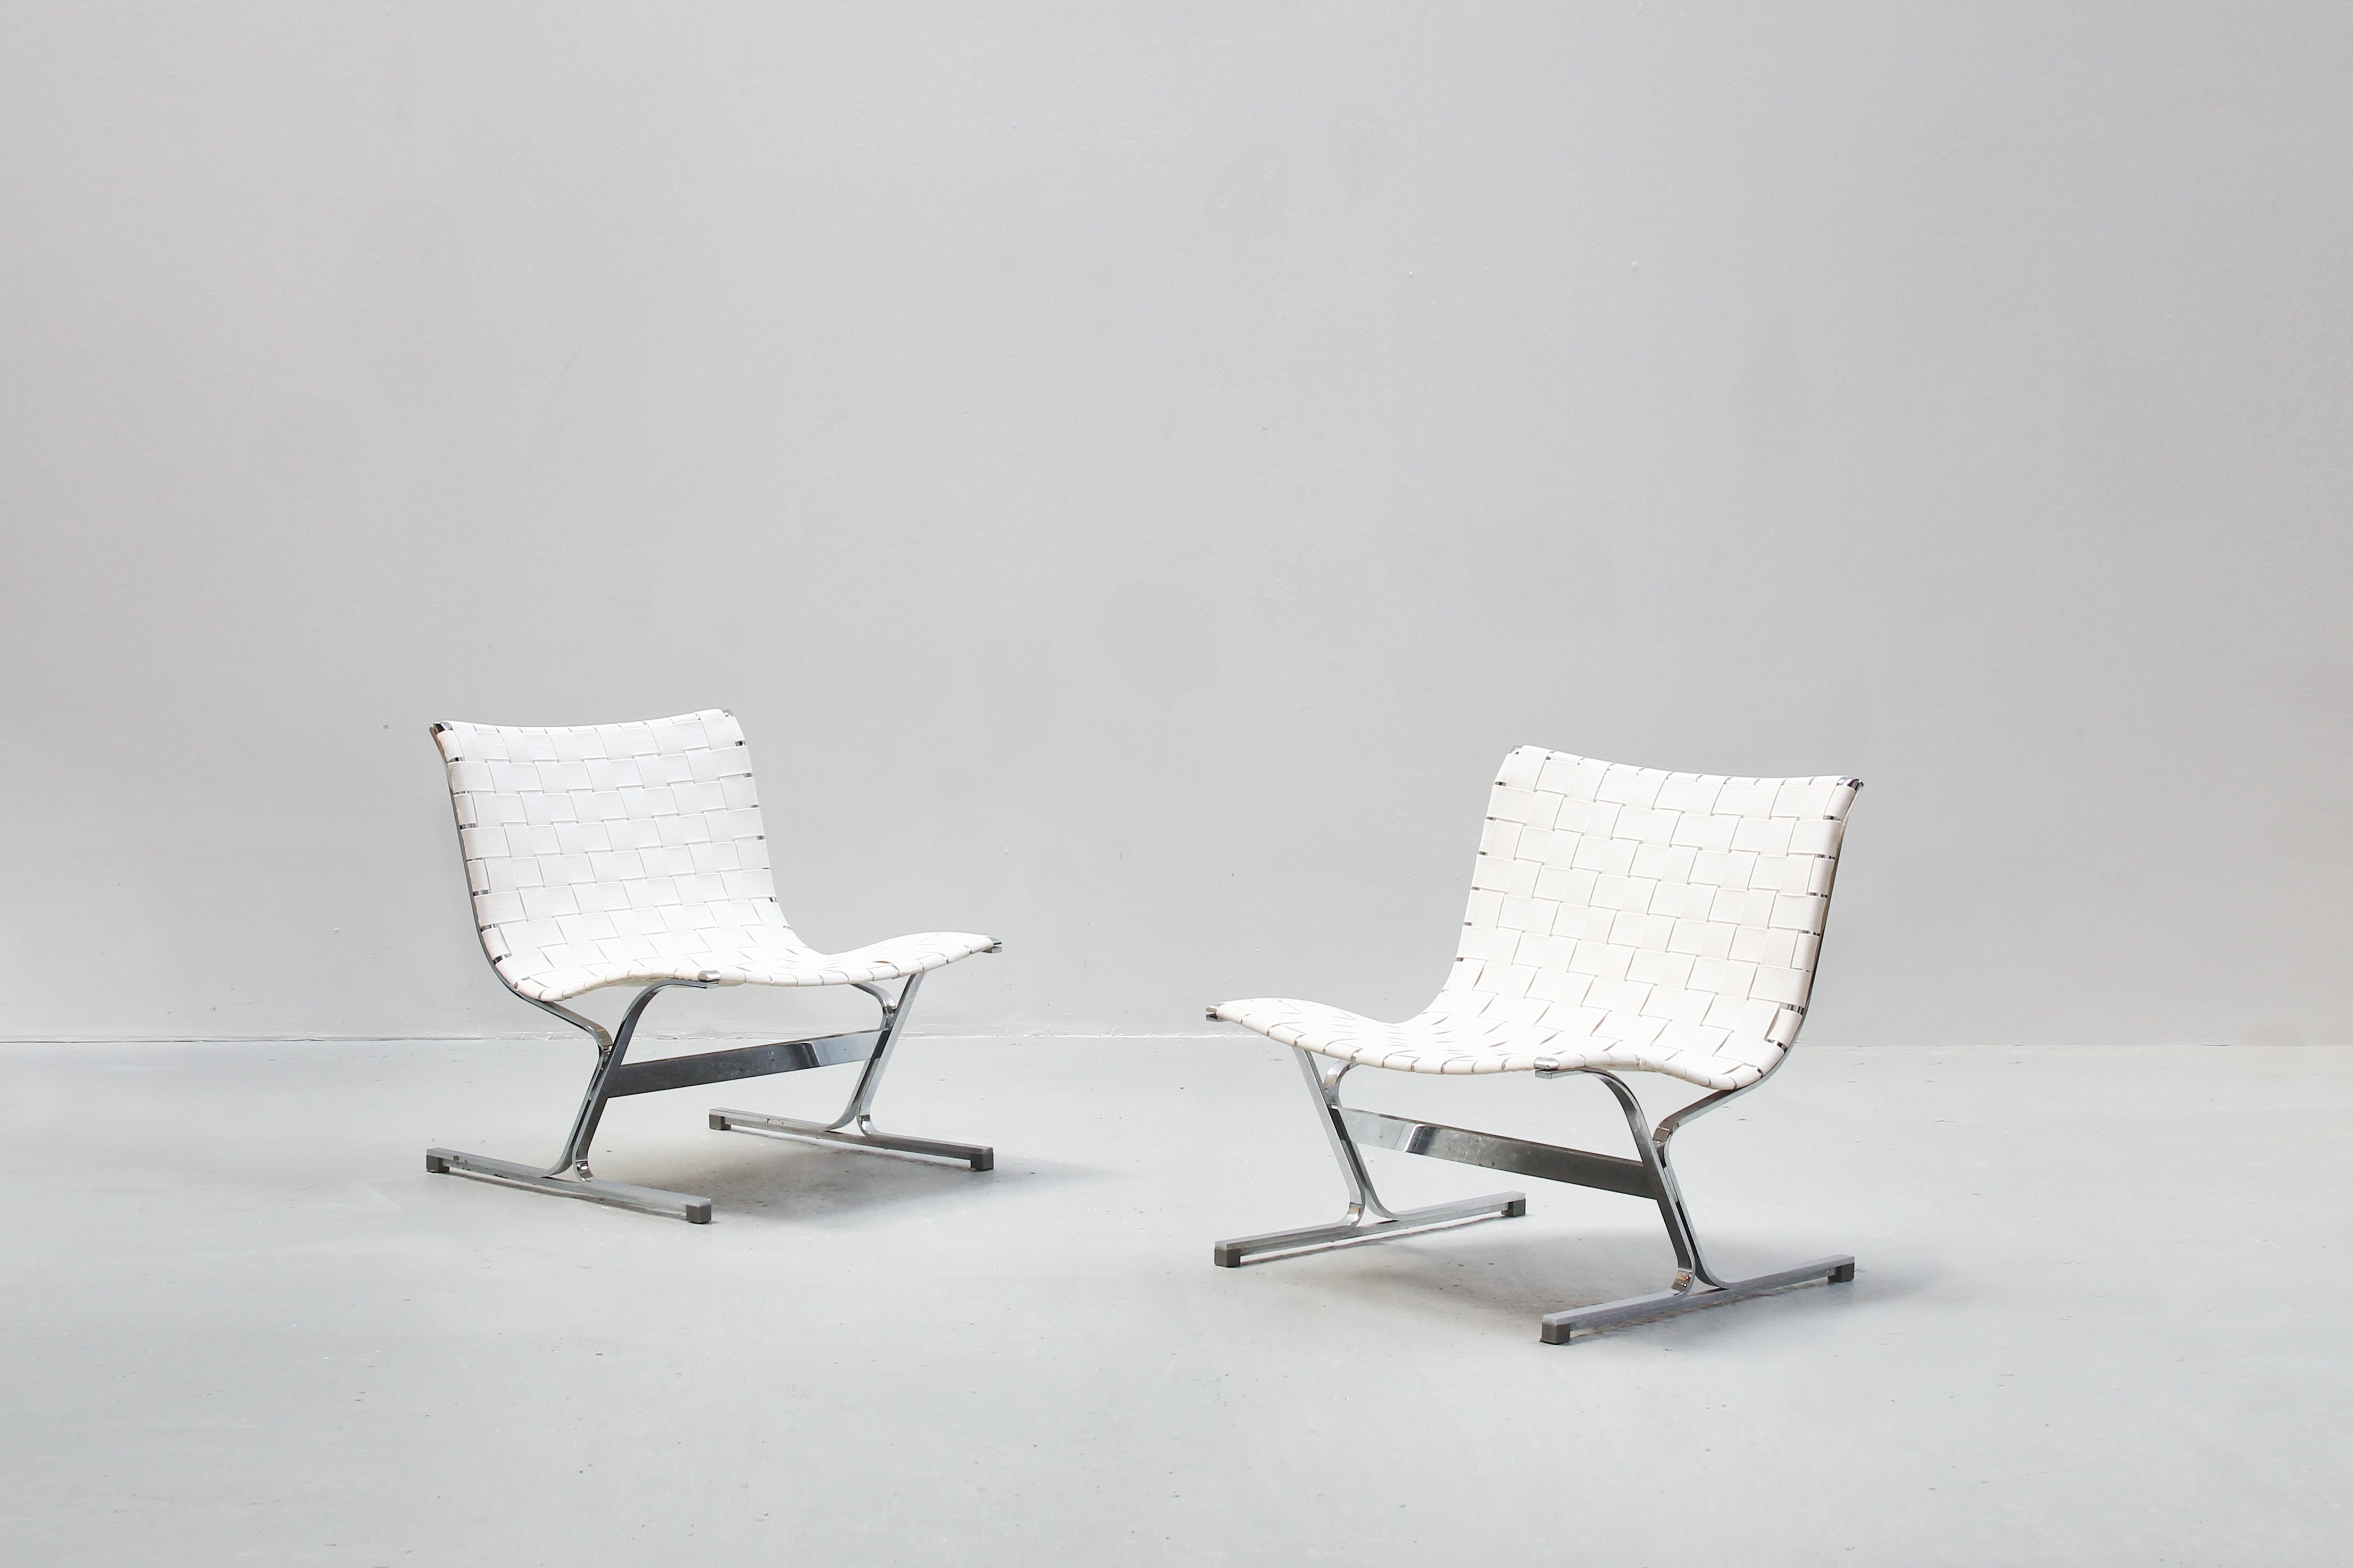 A pair of beautiful lounge chairs designed by Ross Littell and produced by ICF, Italy in the 1970s.
Both chairs are covered with white fabric belts and come in a very good condition with just little traces of usage.

   

    